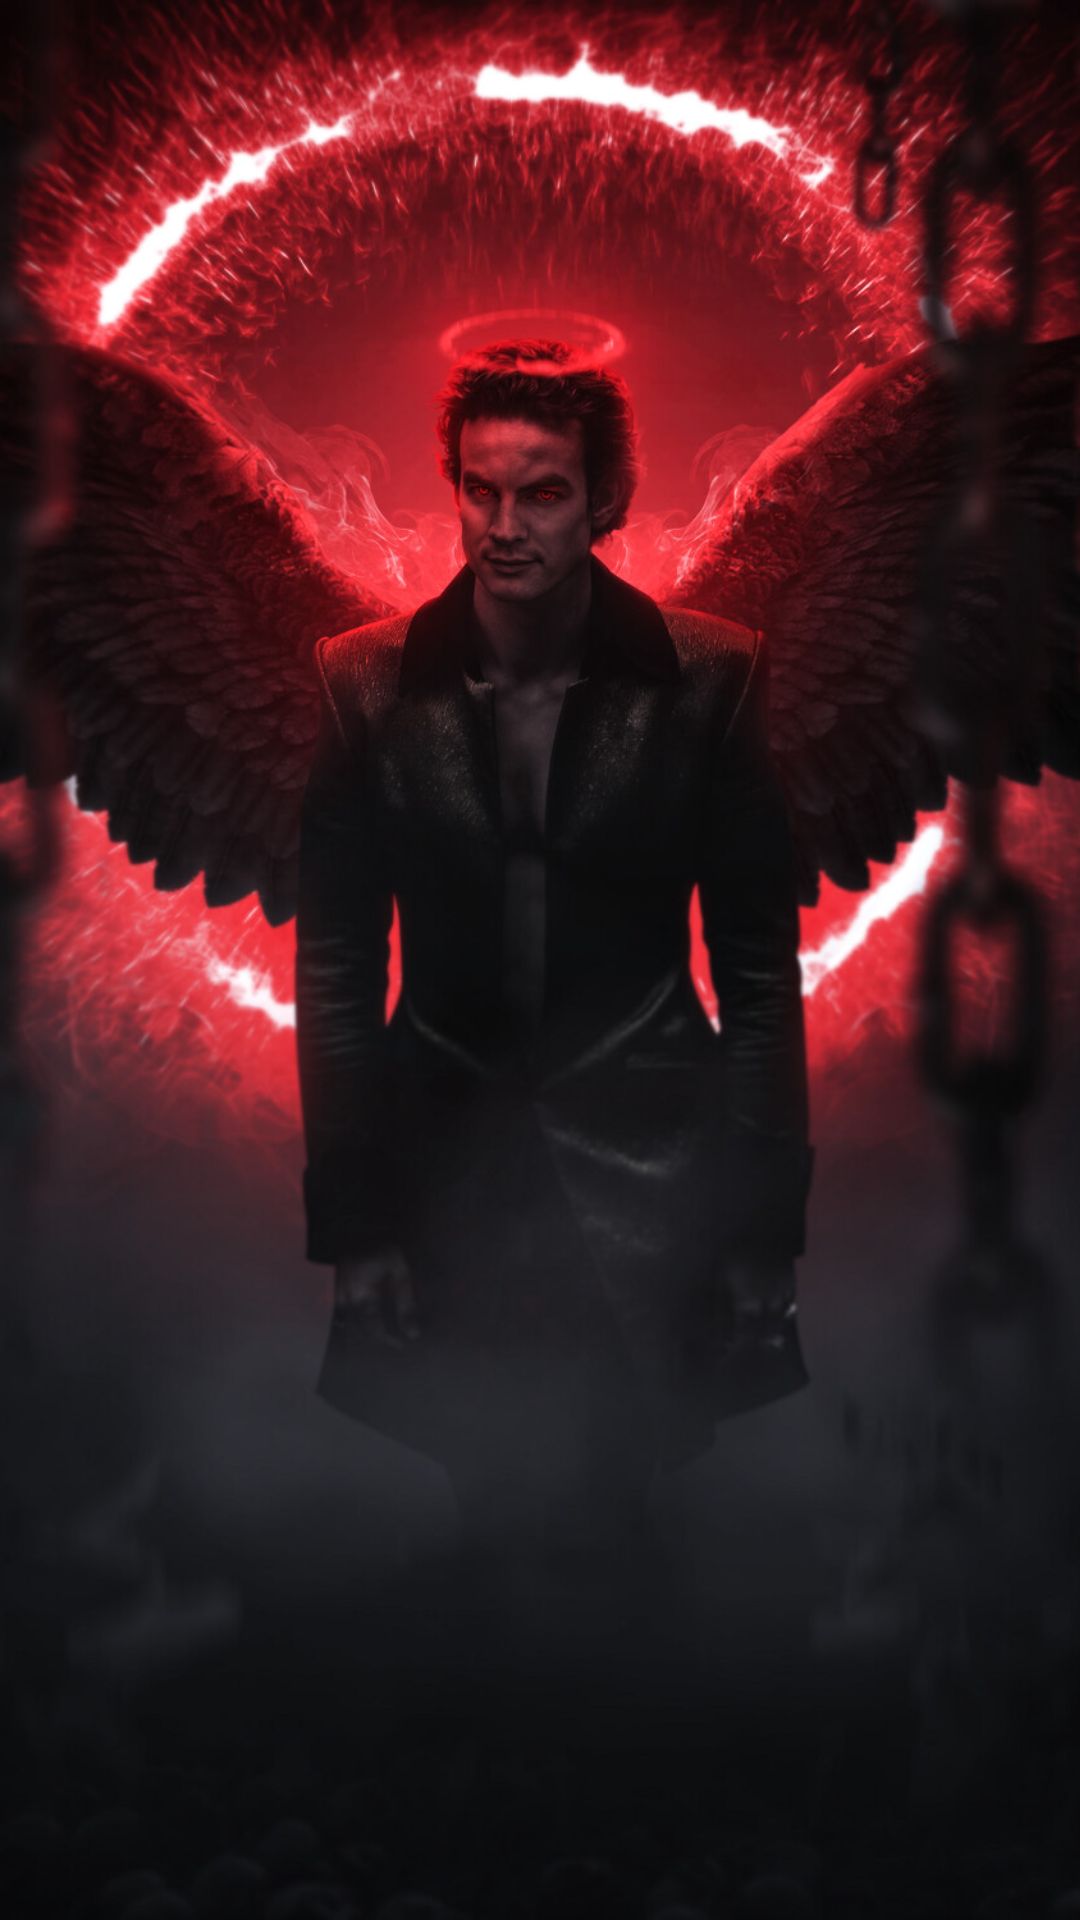 Lucifer Wallpapers - Top 35 Best Lucifer Wallpapers Download